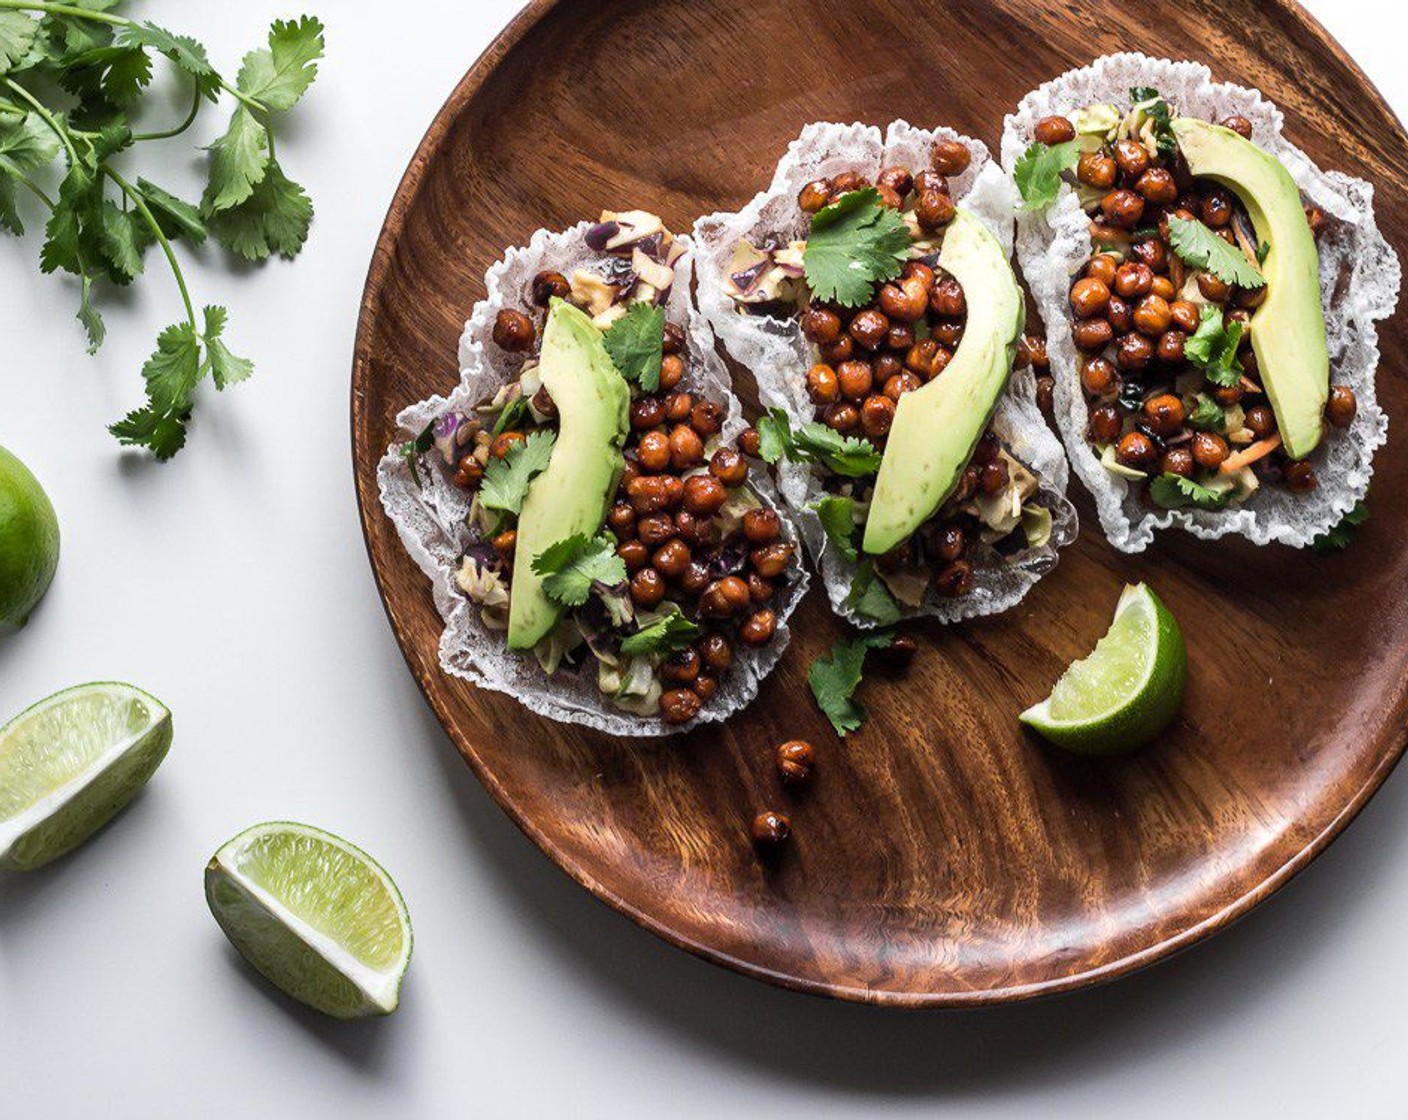 step 10 Once the chickpeas are done roasting, assemble the tacos by filling each rice paper taco shell with some of the Asian chopped salad, a scoop of chickpeas, Avocado (1), Fresh Cilantro (1/2 cup), and serve with a Lime Wedge. Serve and enjoy!